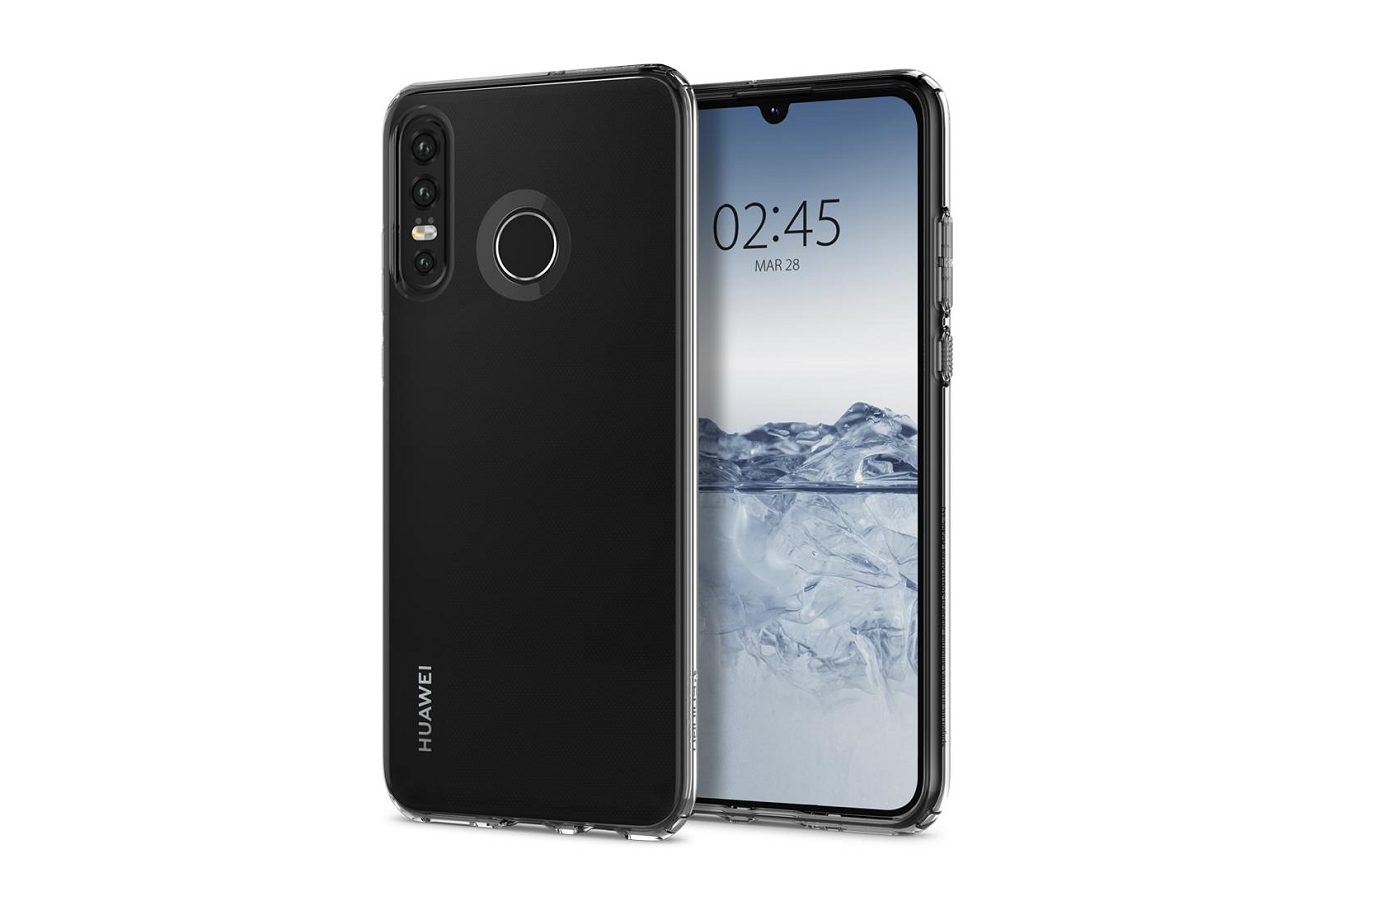 Huawei P30 Lite rumored for March 26th, 2019 launch alongside the Huawei P30 and P30 Lite | Photo by : Spigen.